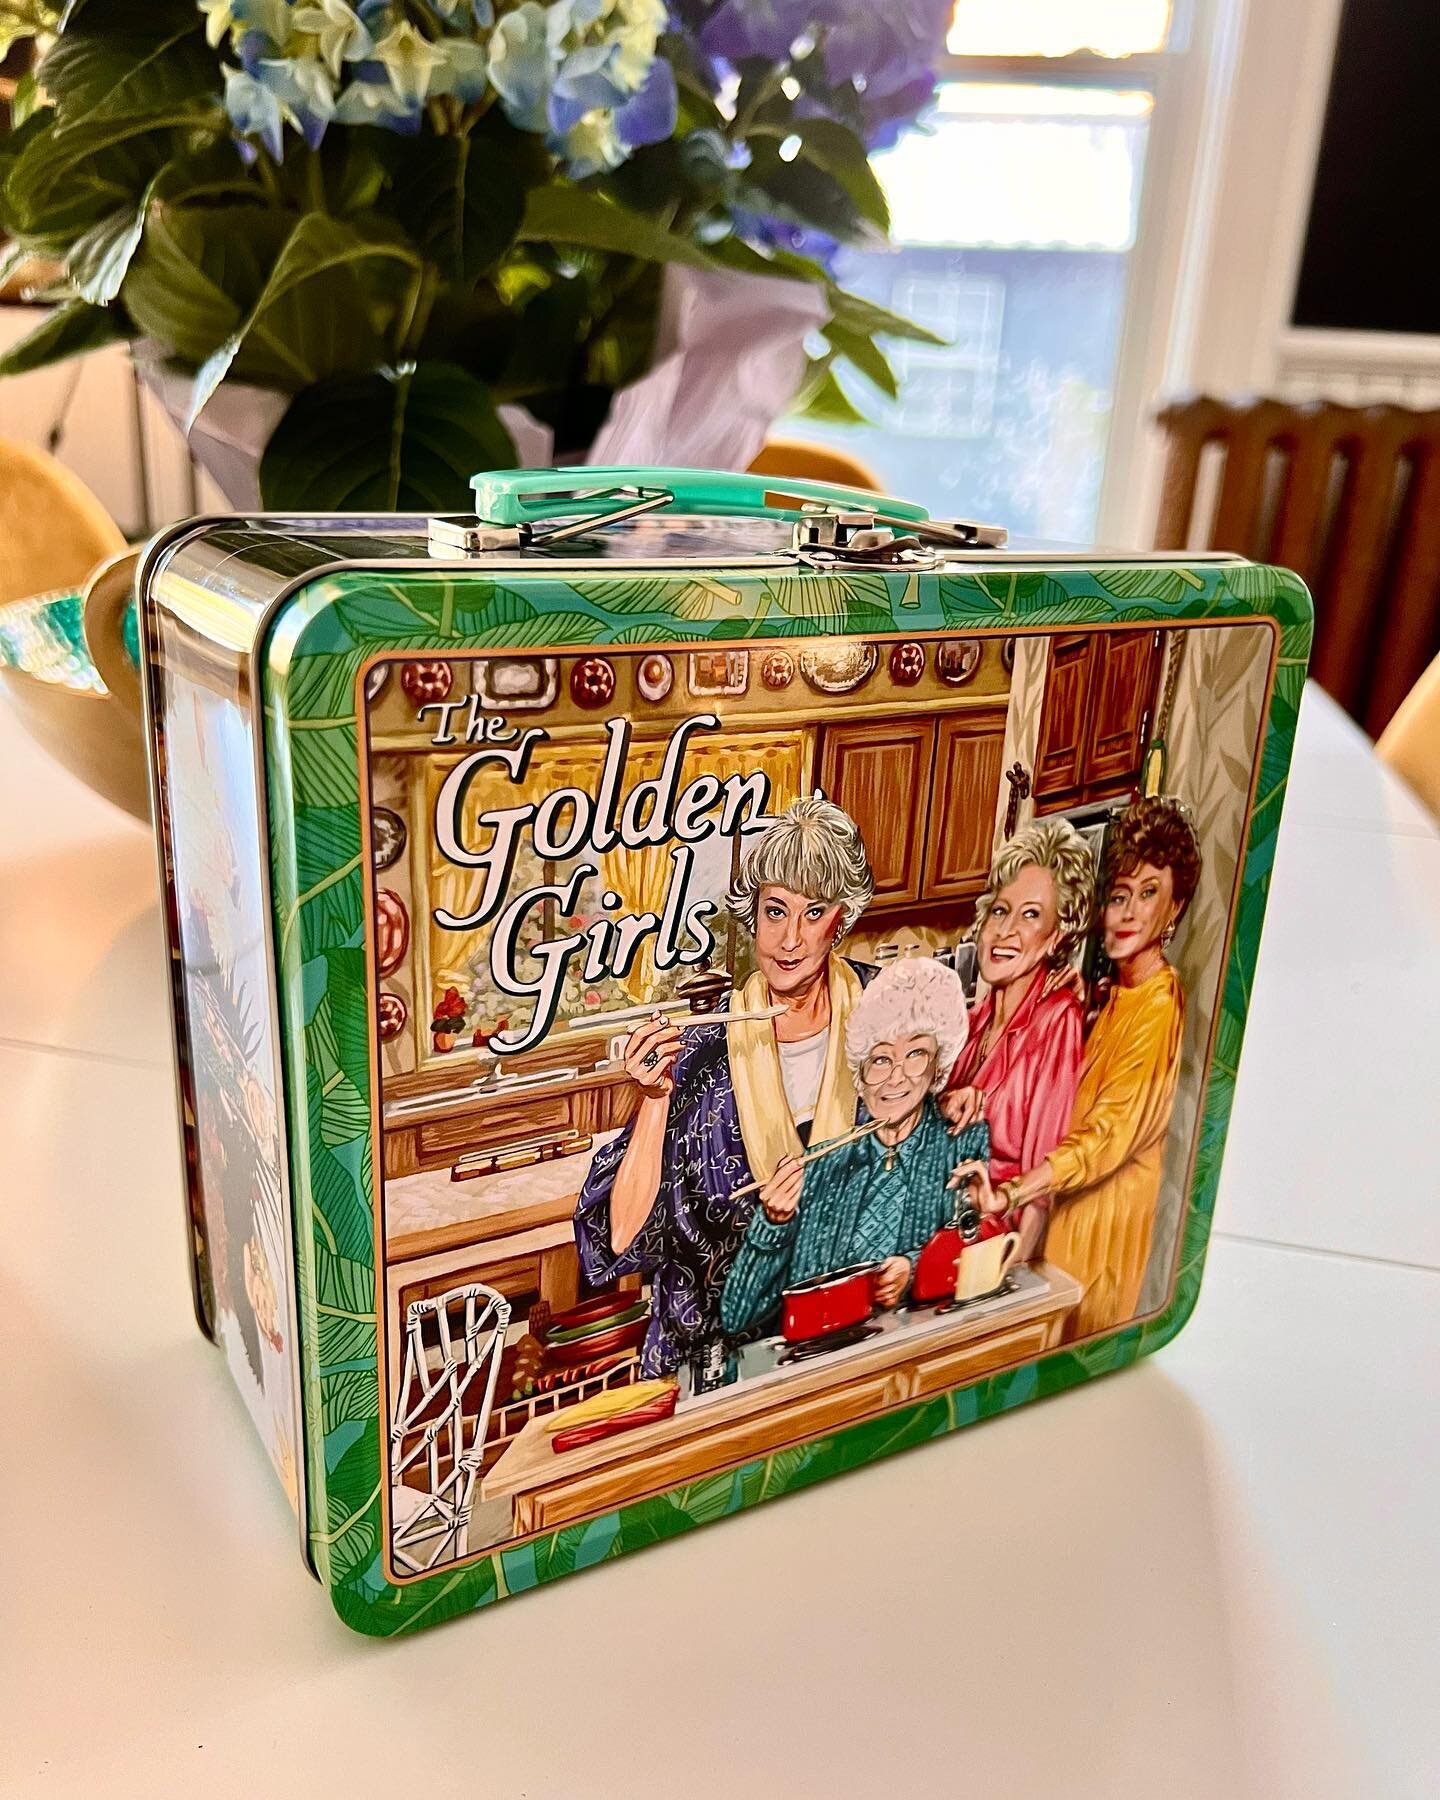 I thought you&rsquo;d all like to know a bit more about me so here&rsquo;s my favourite thing ever that I ordered, which finally arrived today. 
Yes, it&rsquo;s a Golden Girls lunchbox, and yes, I am going to use it. 
#ThankYouForBeingAFriend 
#Golde